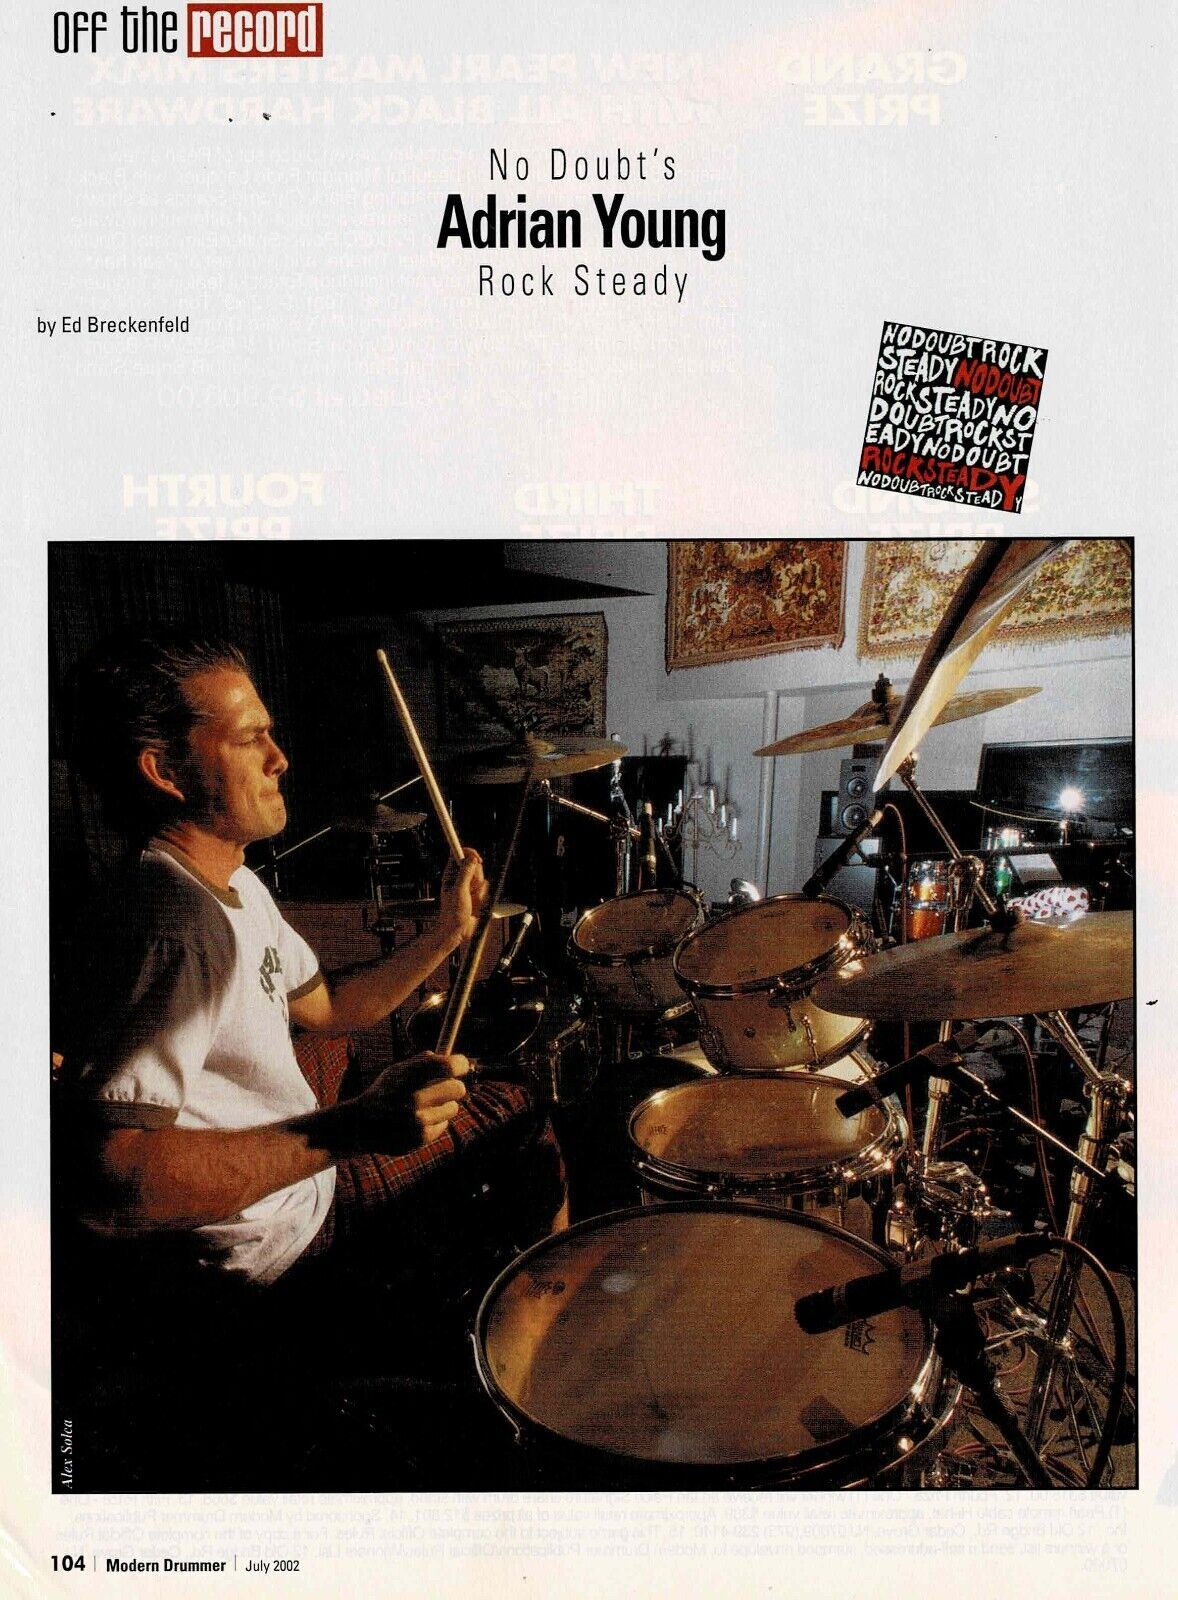 Adrian Young of No Doubt - Drummer - 2002 - Music Print Ad Photo